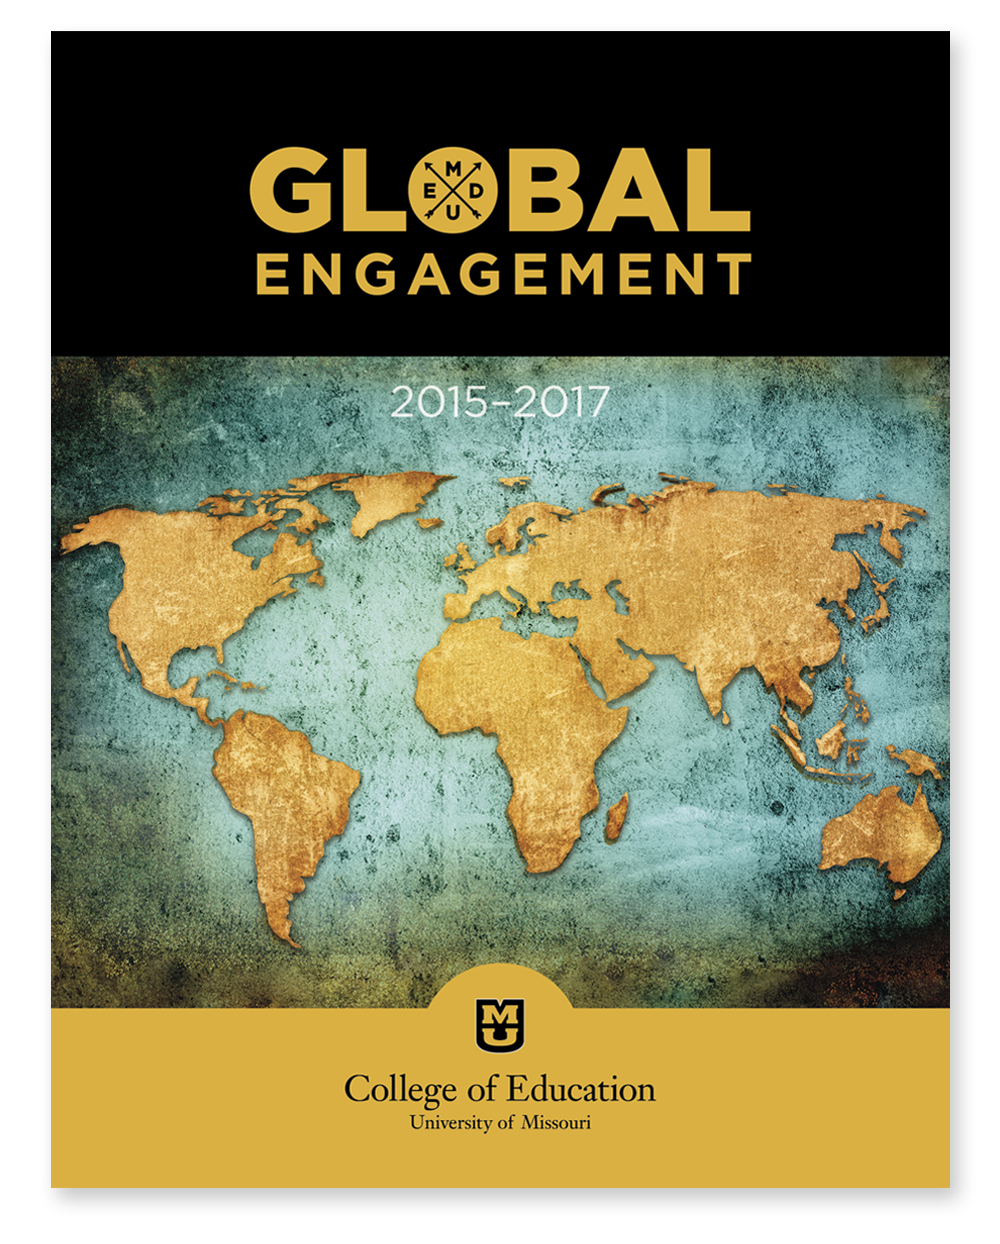 University of Missouri College of Education Global Engagement Report 2015-2017, front cover